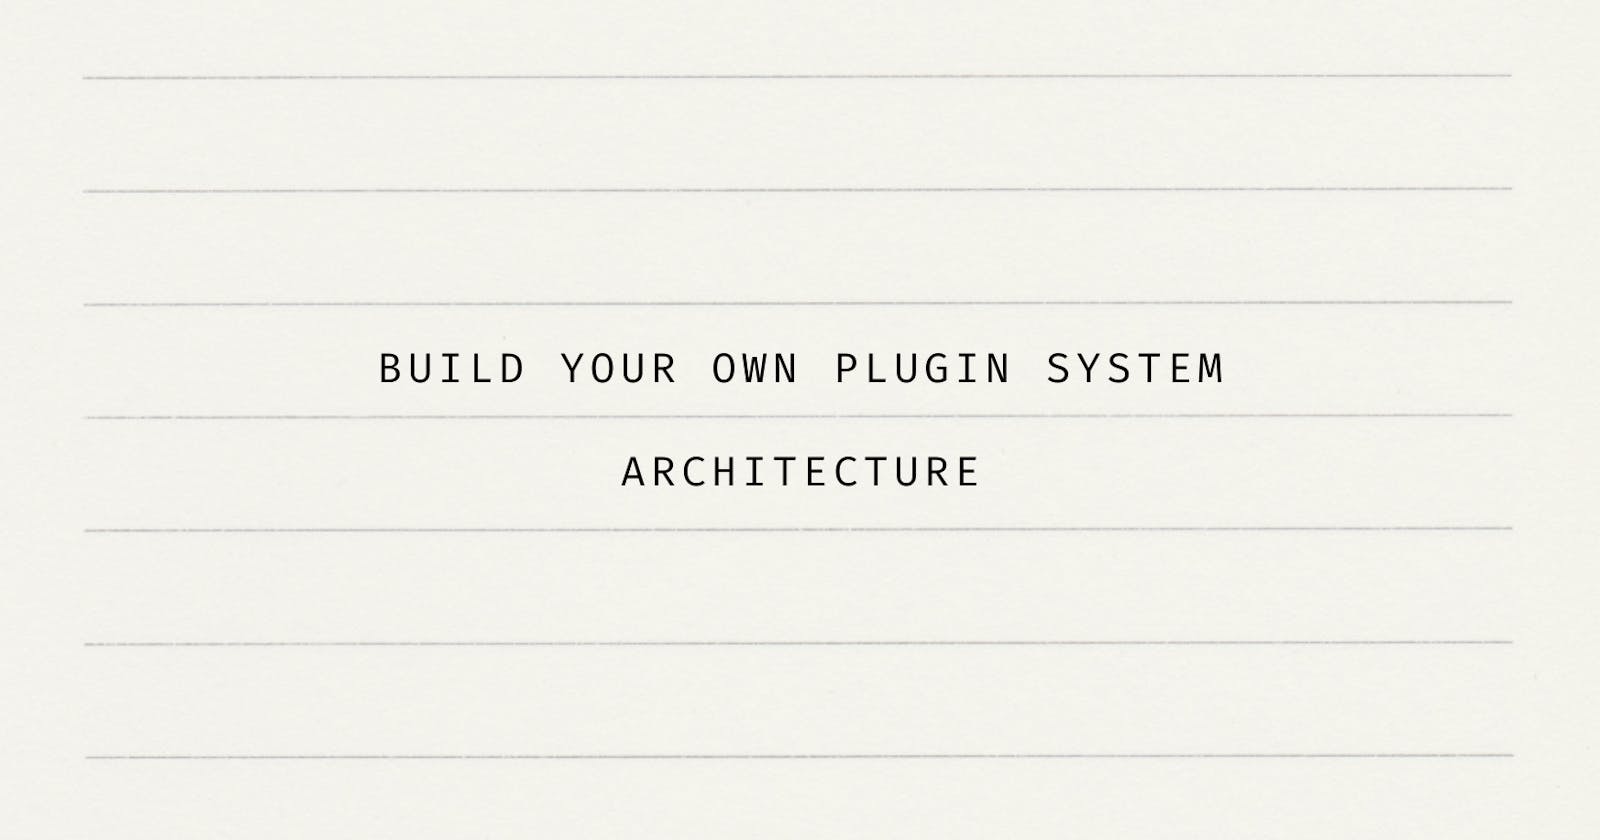 Build your own Plugin System Architecture